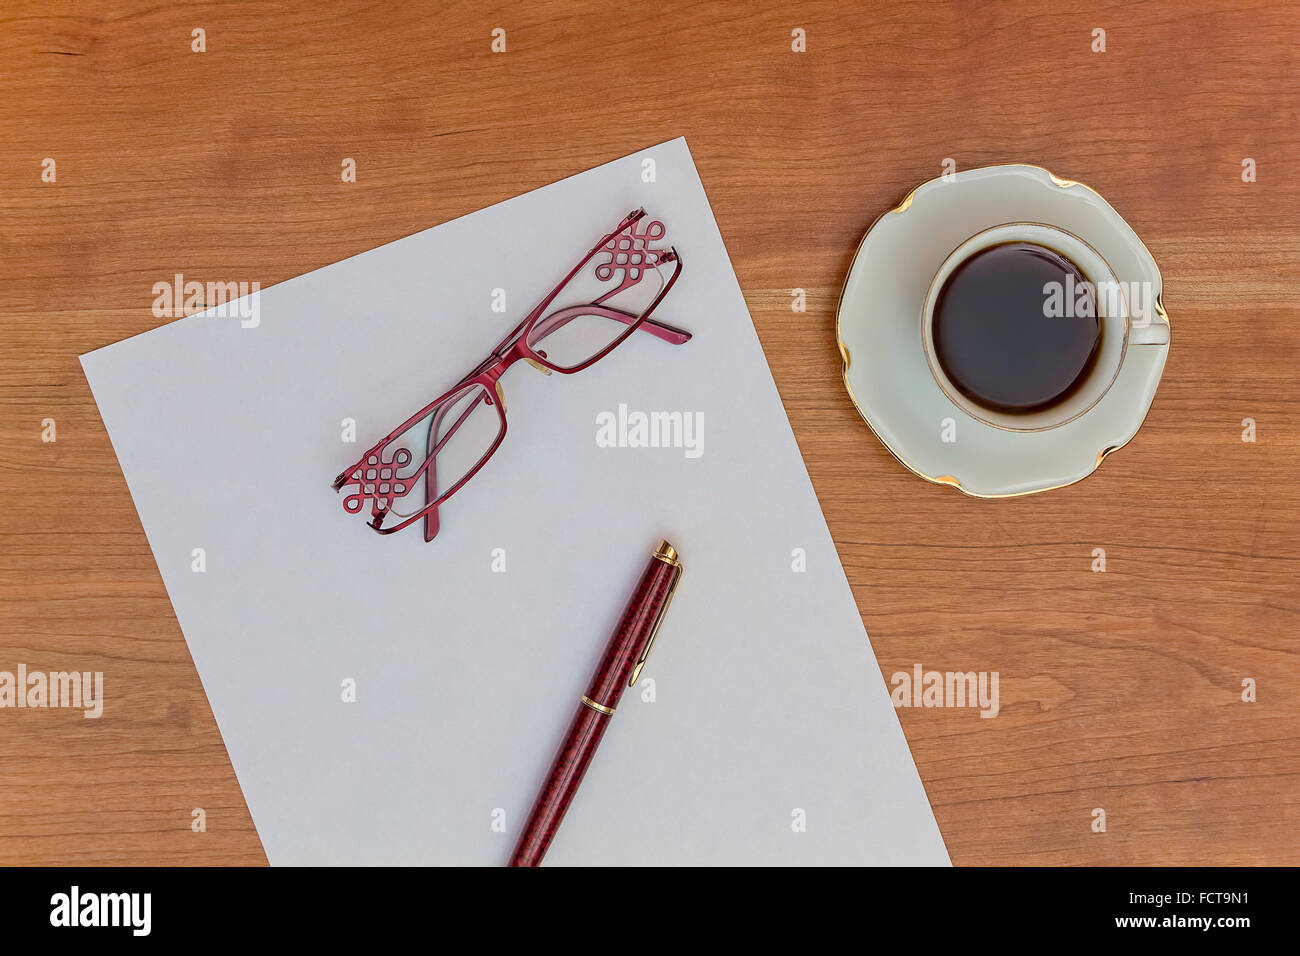 Office paperwork. Desktop in the office with paper, pen, glasses and coffee. Stock Photo